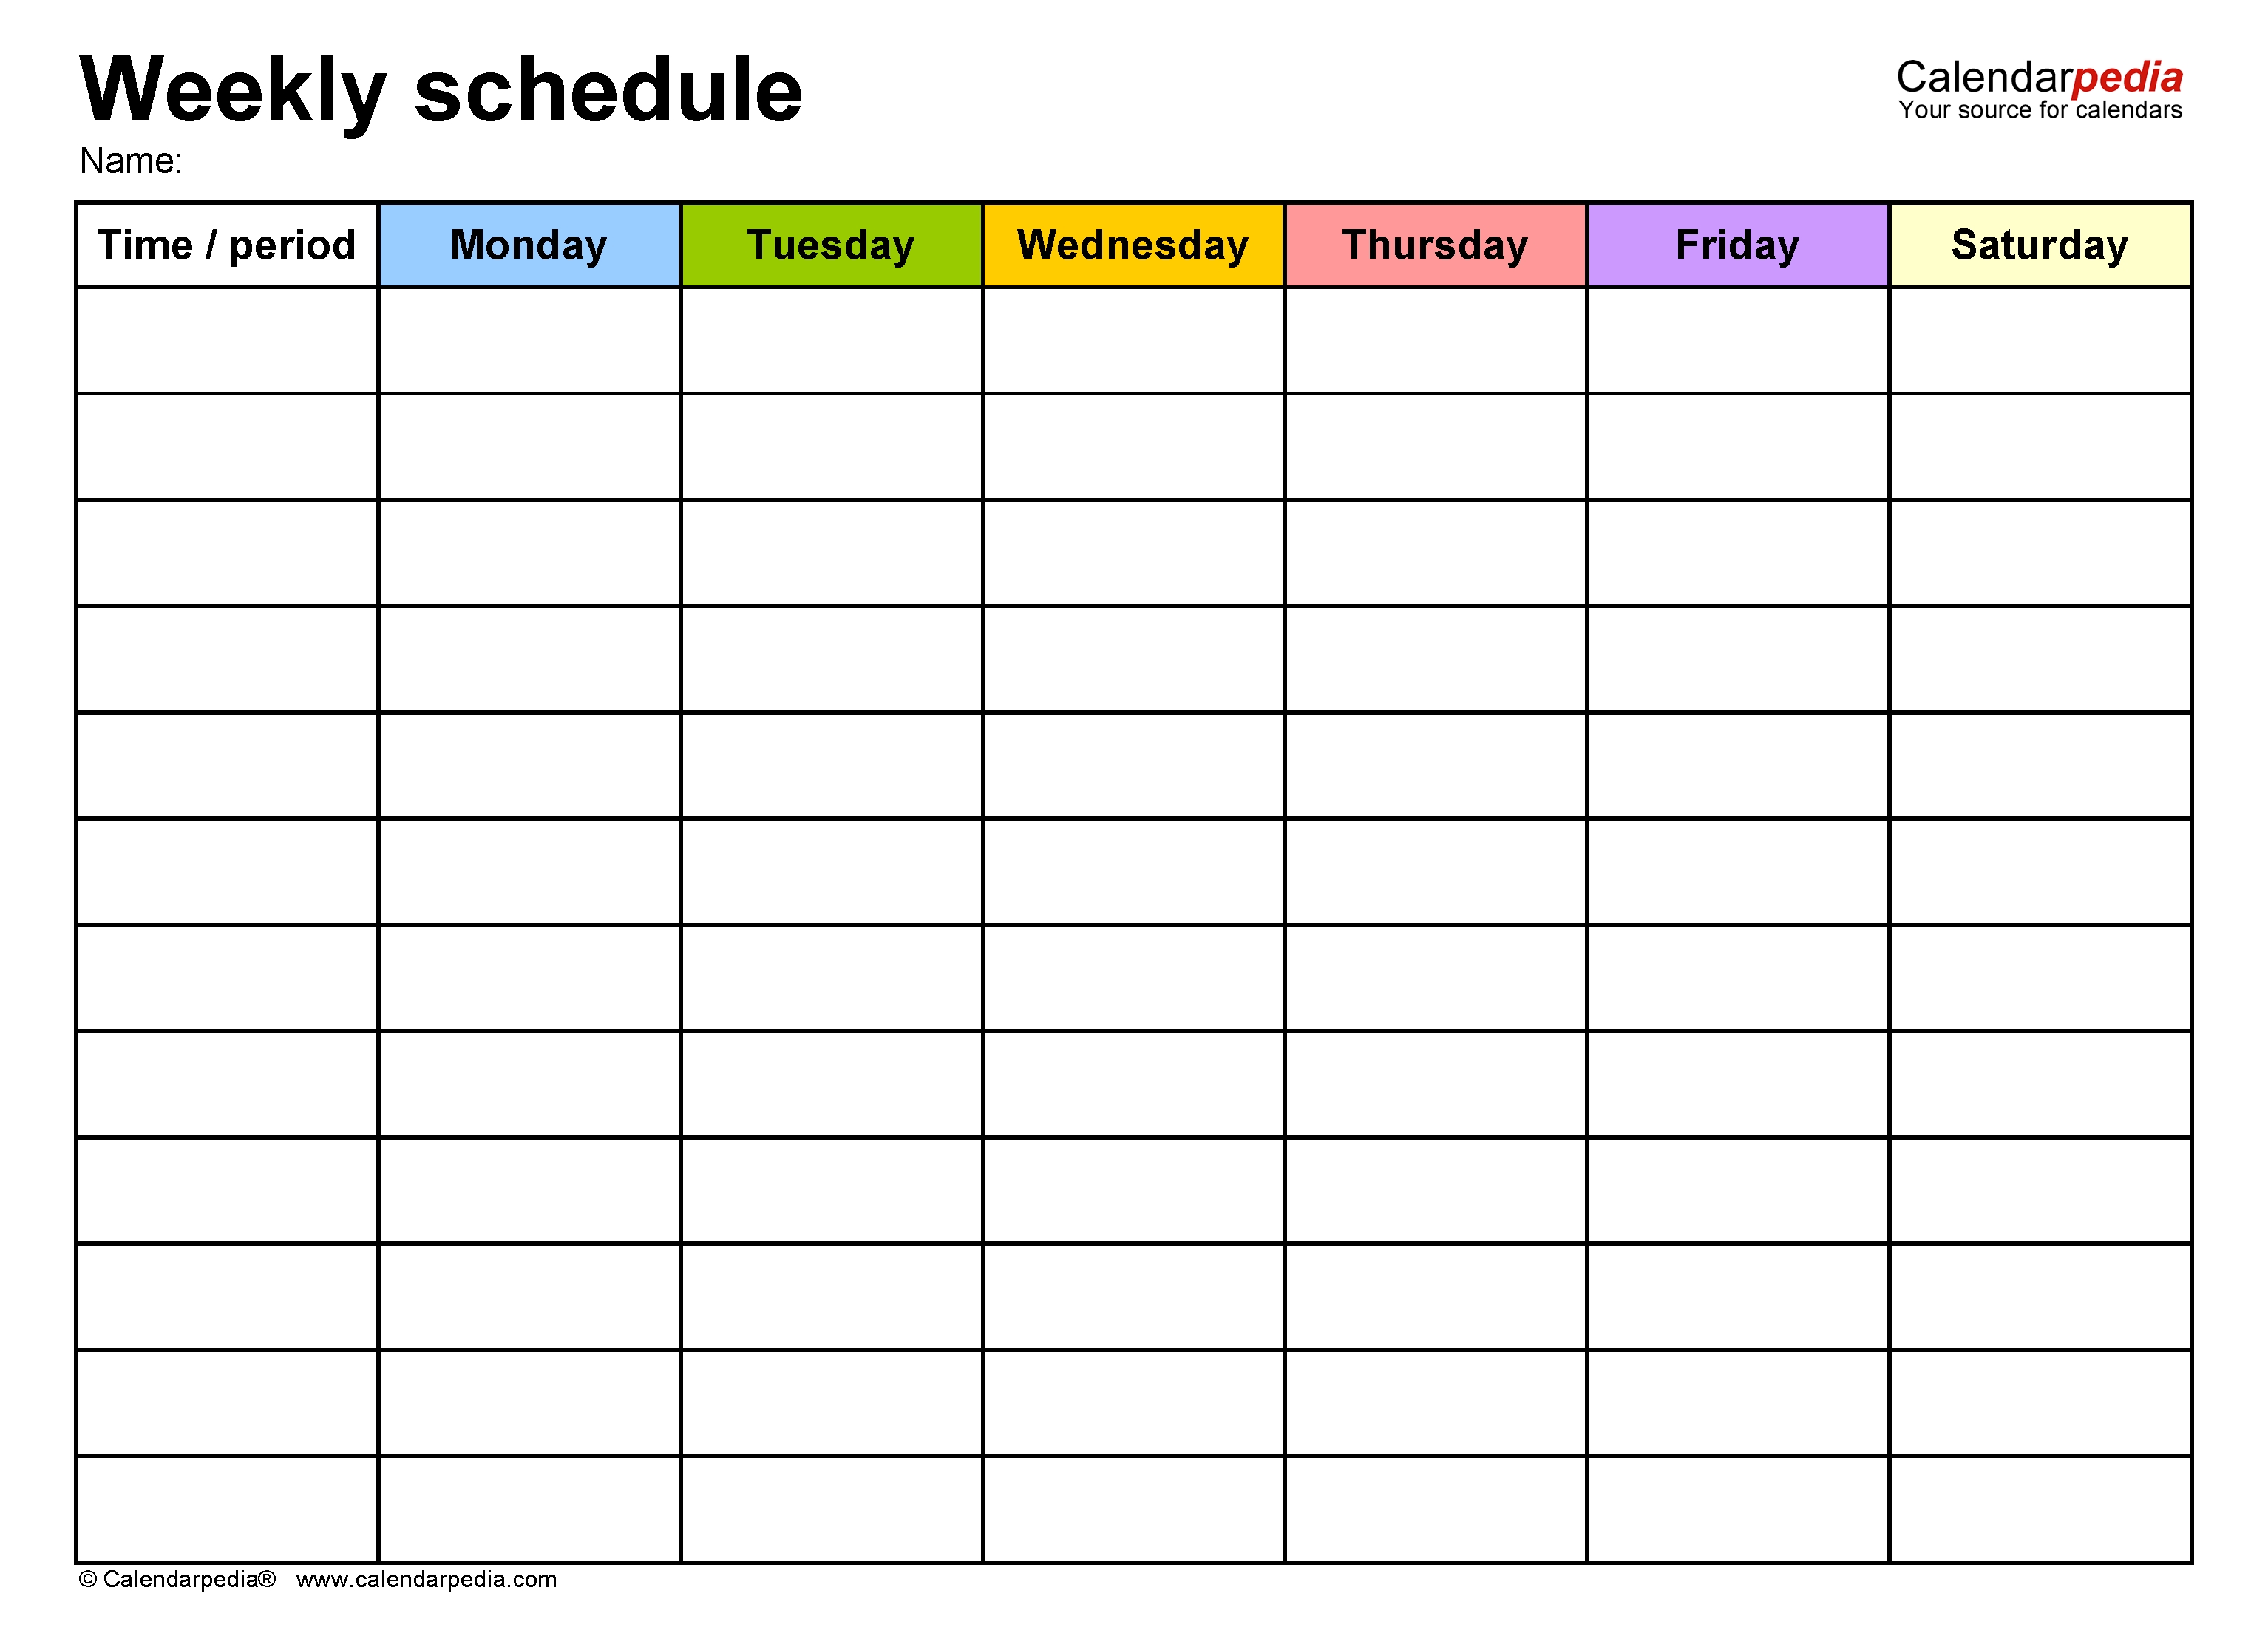 Free Weekly Schedules For Word - 18 Templates 7 Day Appointment Calendar Template